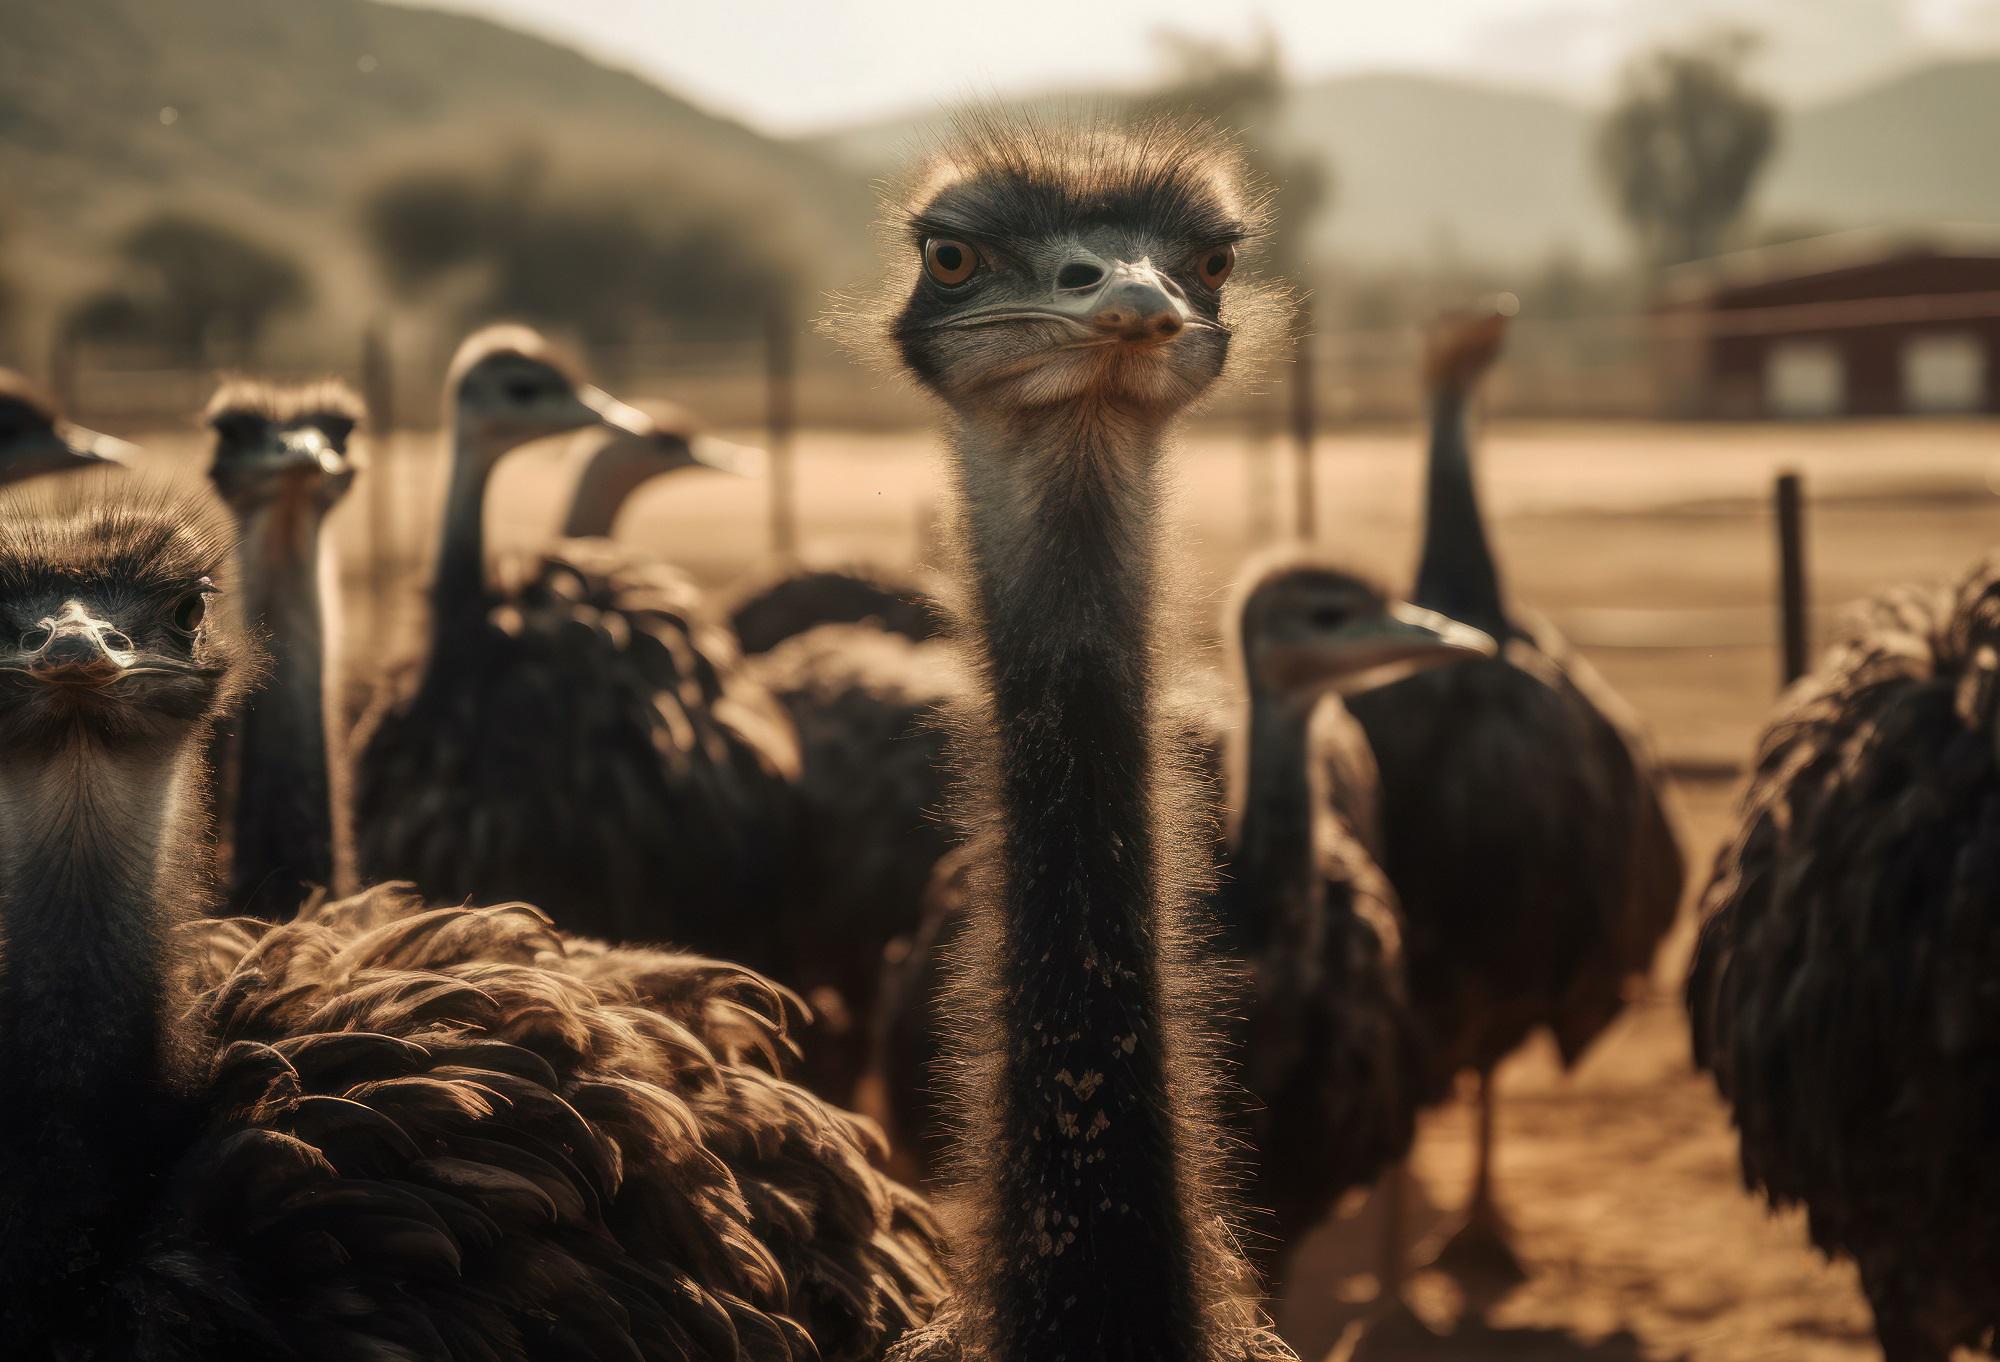 “I’d rather not know.” Science explains why we act like ostriches.